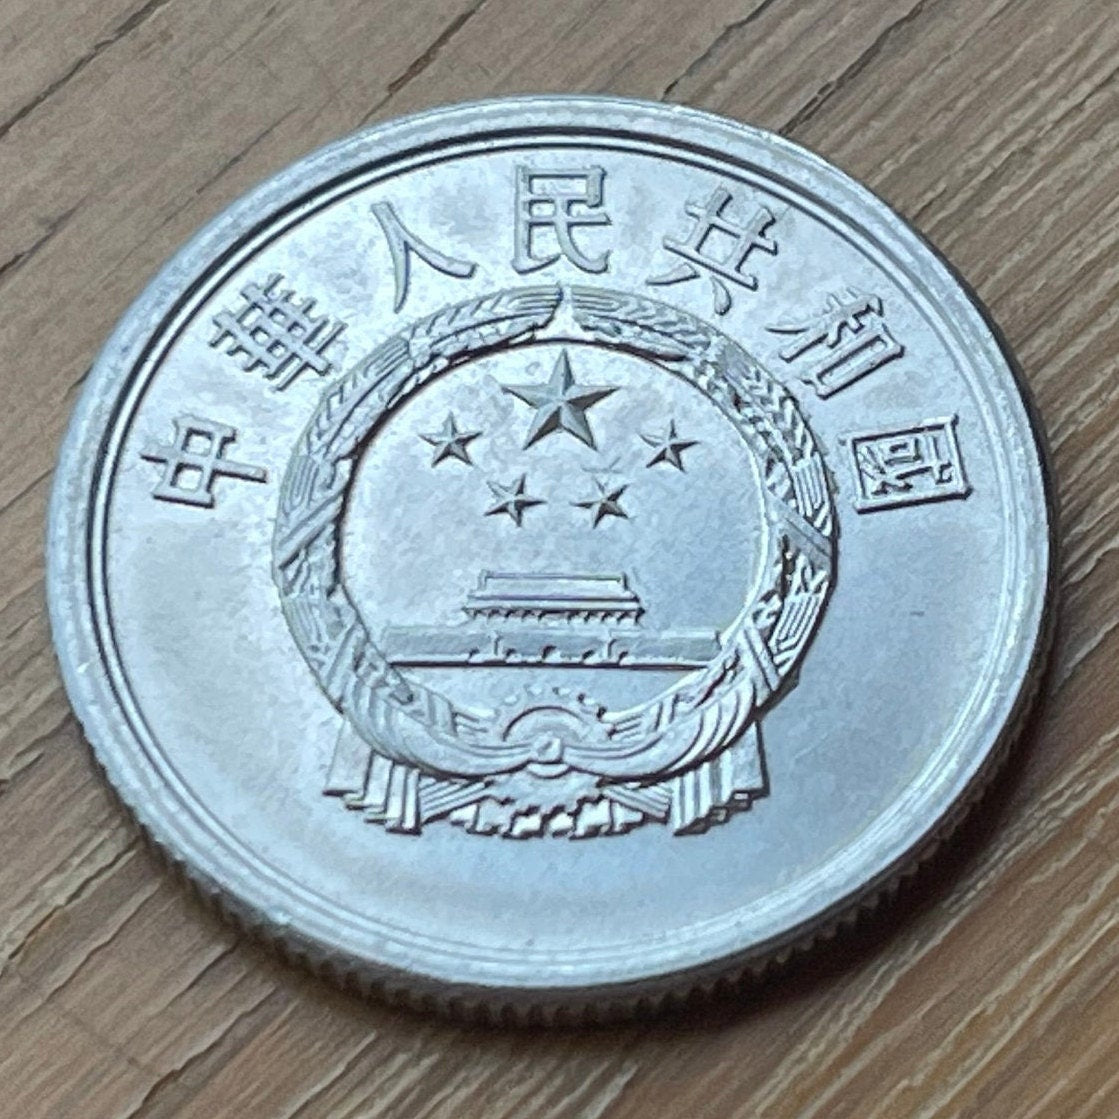 Tiananmen Gate 5 Fen China Authentic Coin Money for Jewelry and Craft Making (Gate of Heavenly Peace)